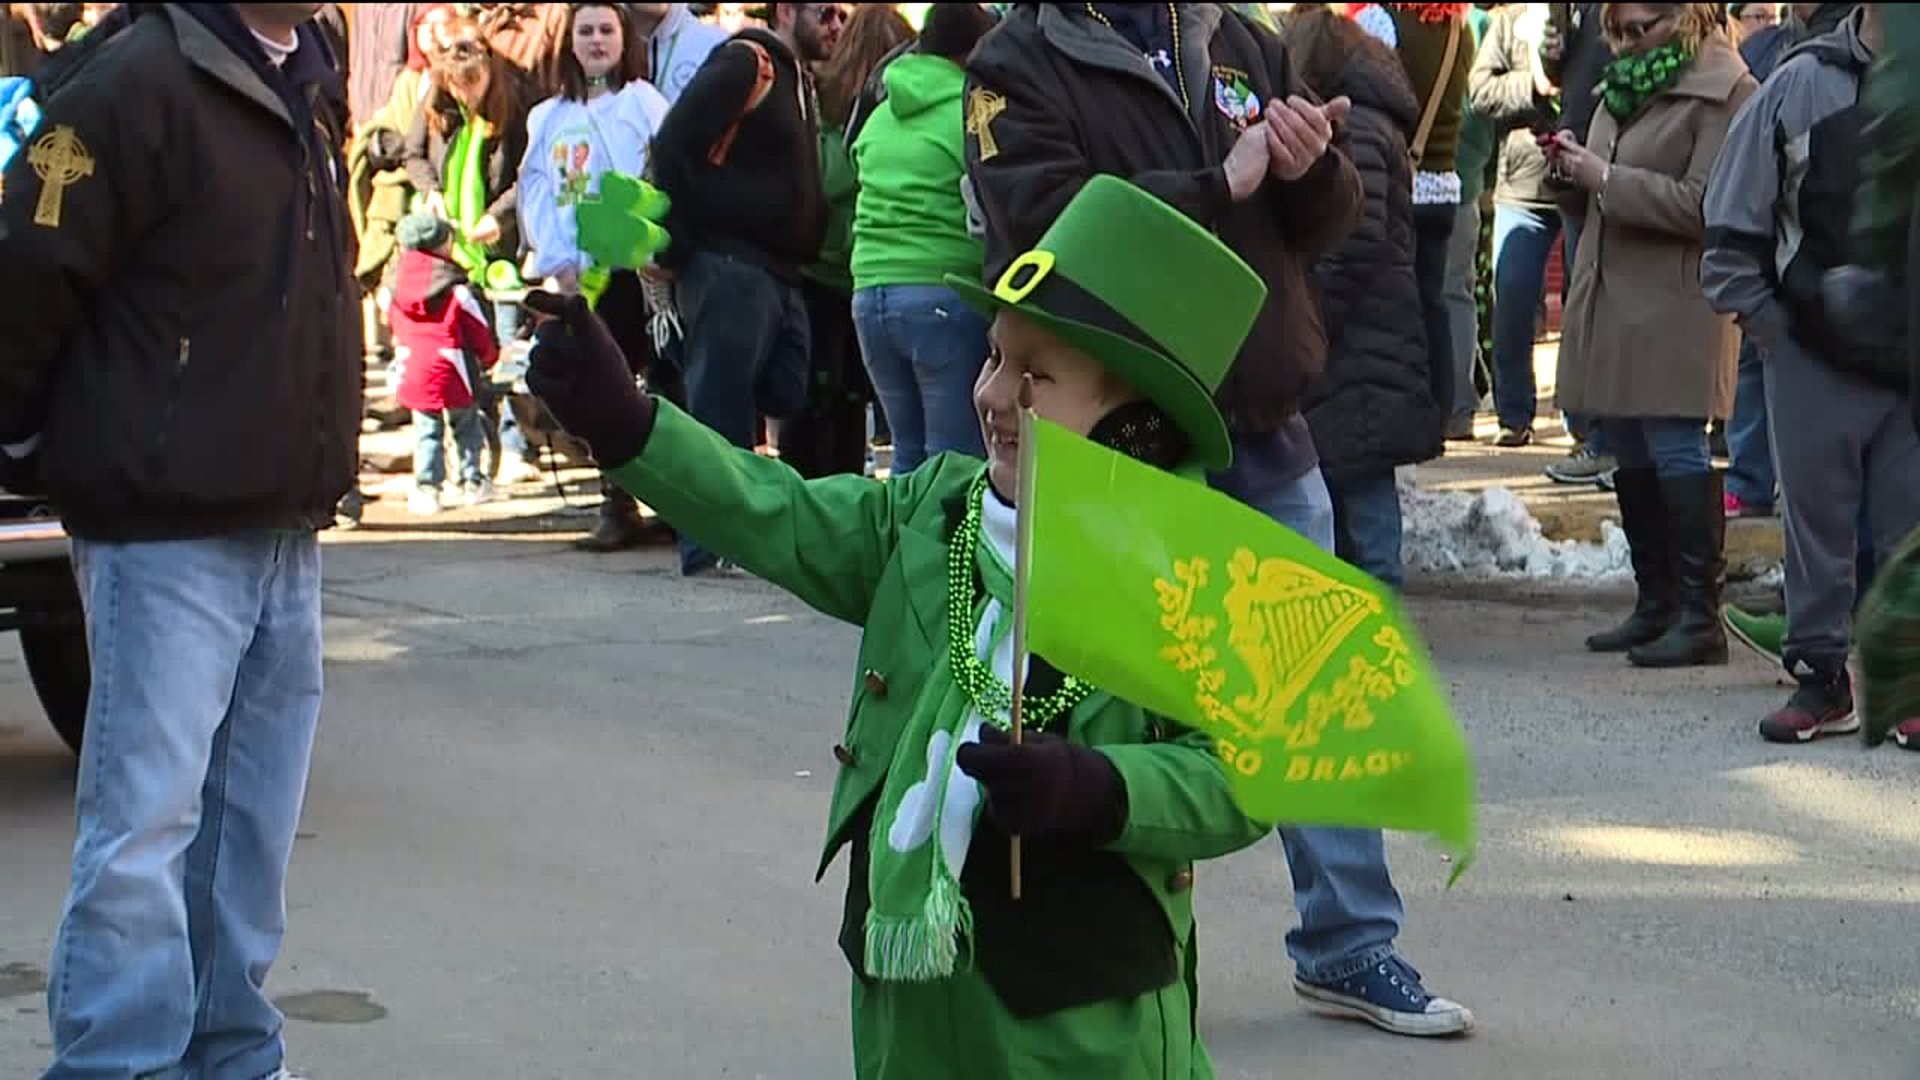 Celebrating St. Patrick's Day with a Parade in Jim Thorpe